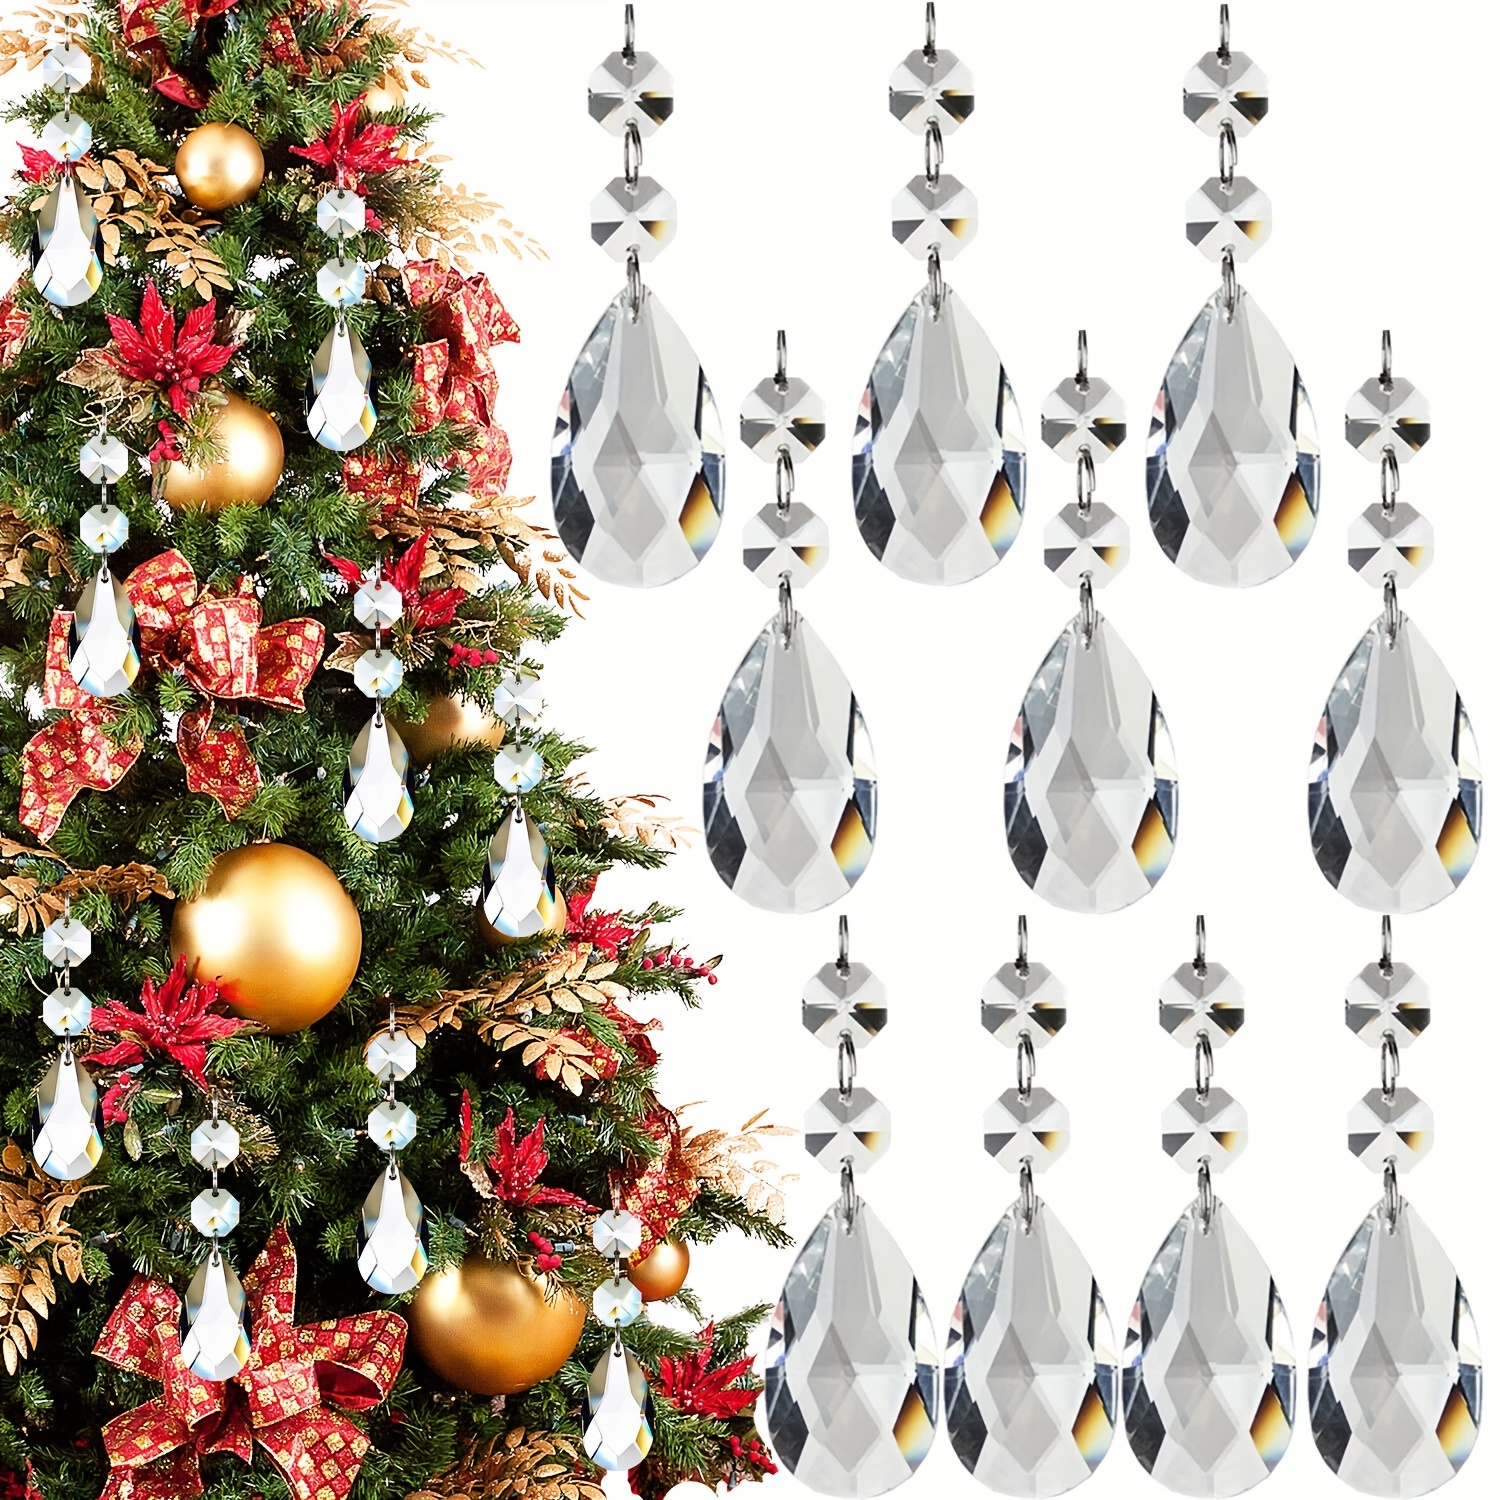 2 Pcs Crystal Garland Silver Christmas Decorations,16Ft Beaded Garland for Christmas Tree,Clear Iridescent Silver Christmas Tree Beads Twist Bead